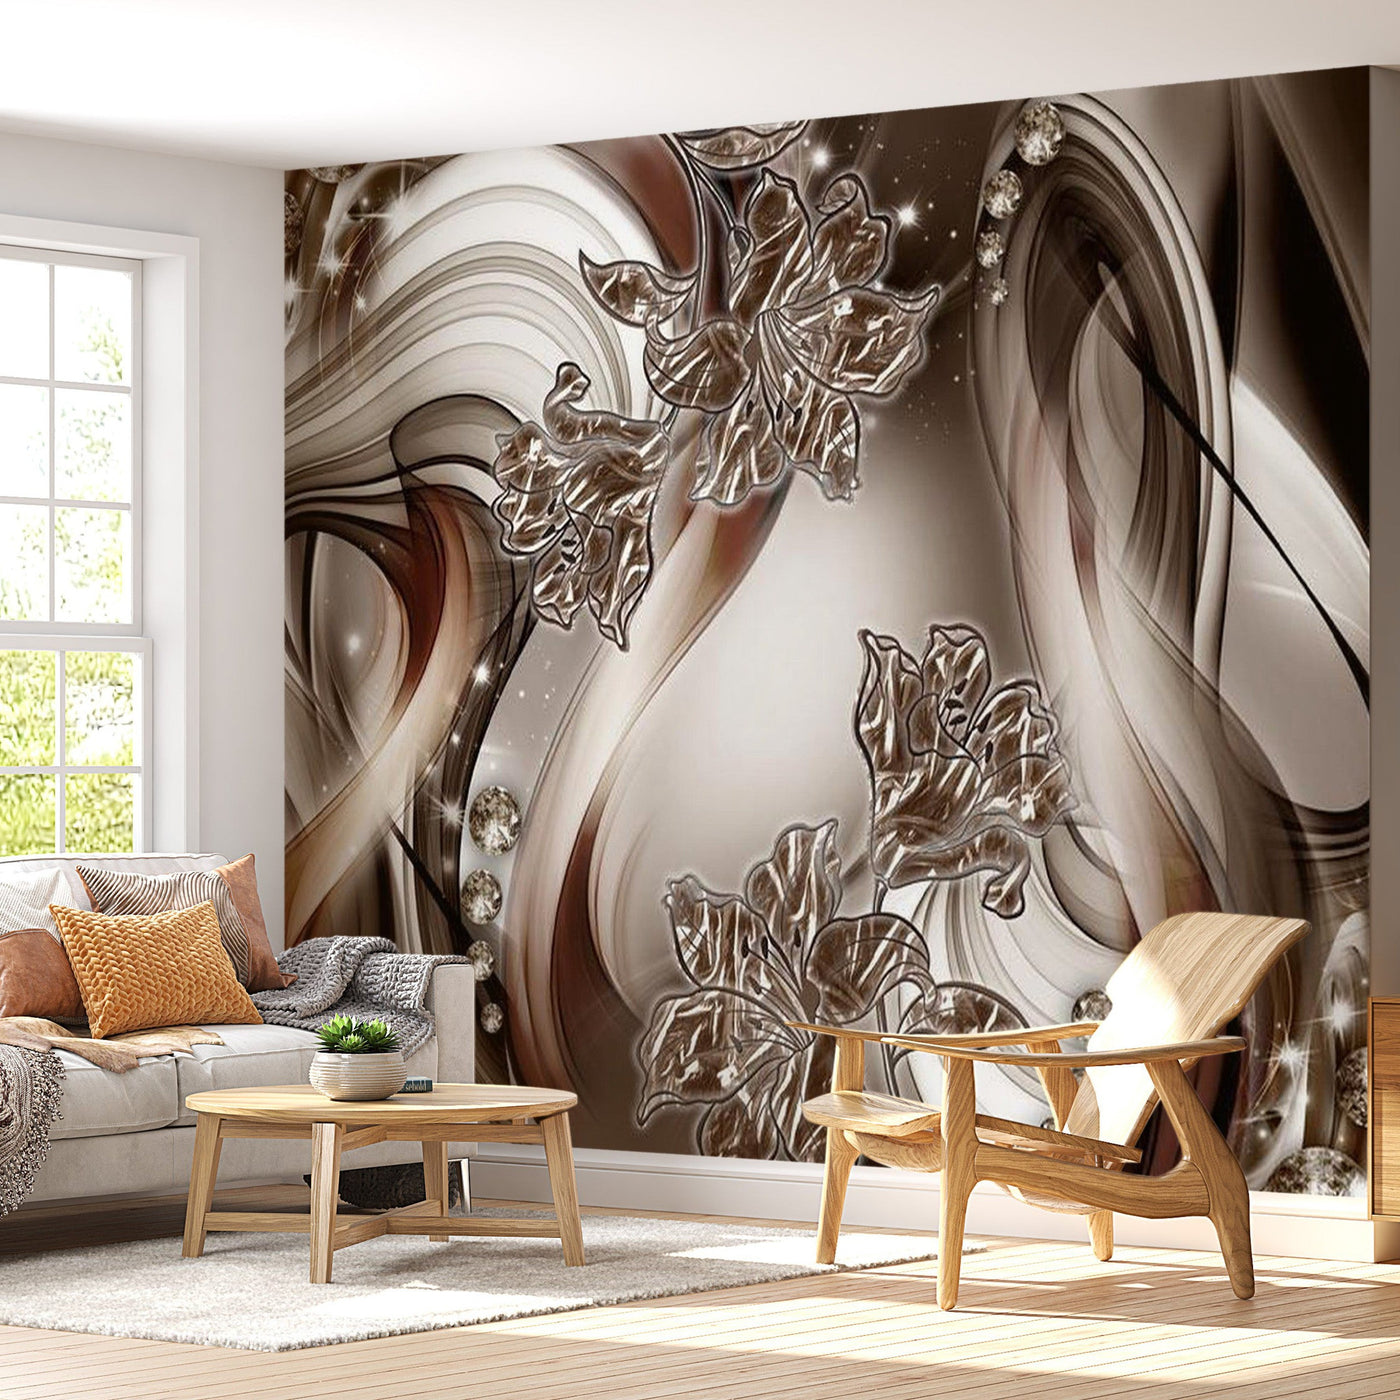 Peel & Stick Glam Wall Mural - Autumn Dance - Removable Wall Decals